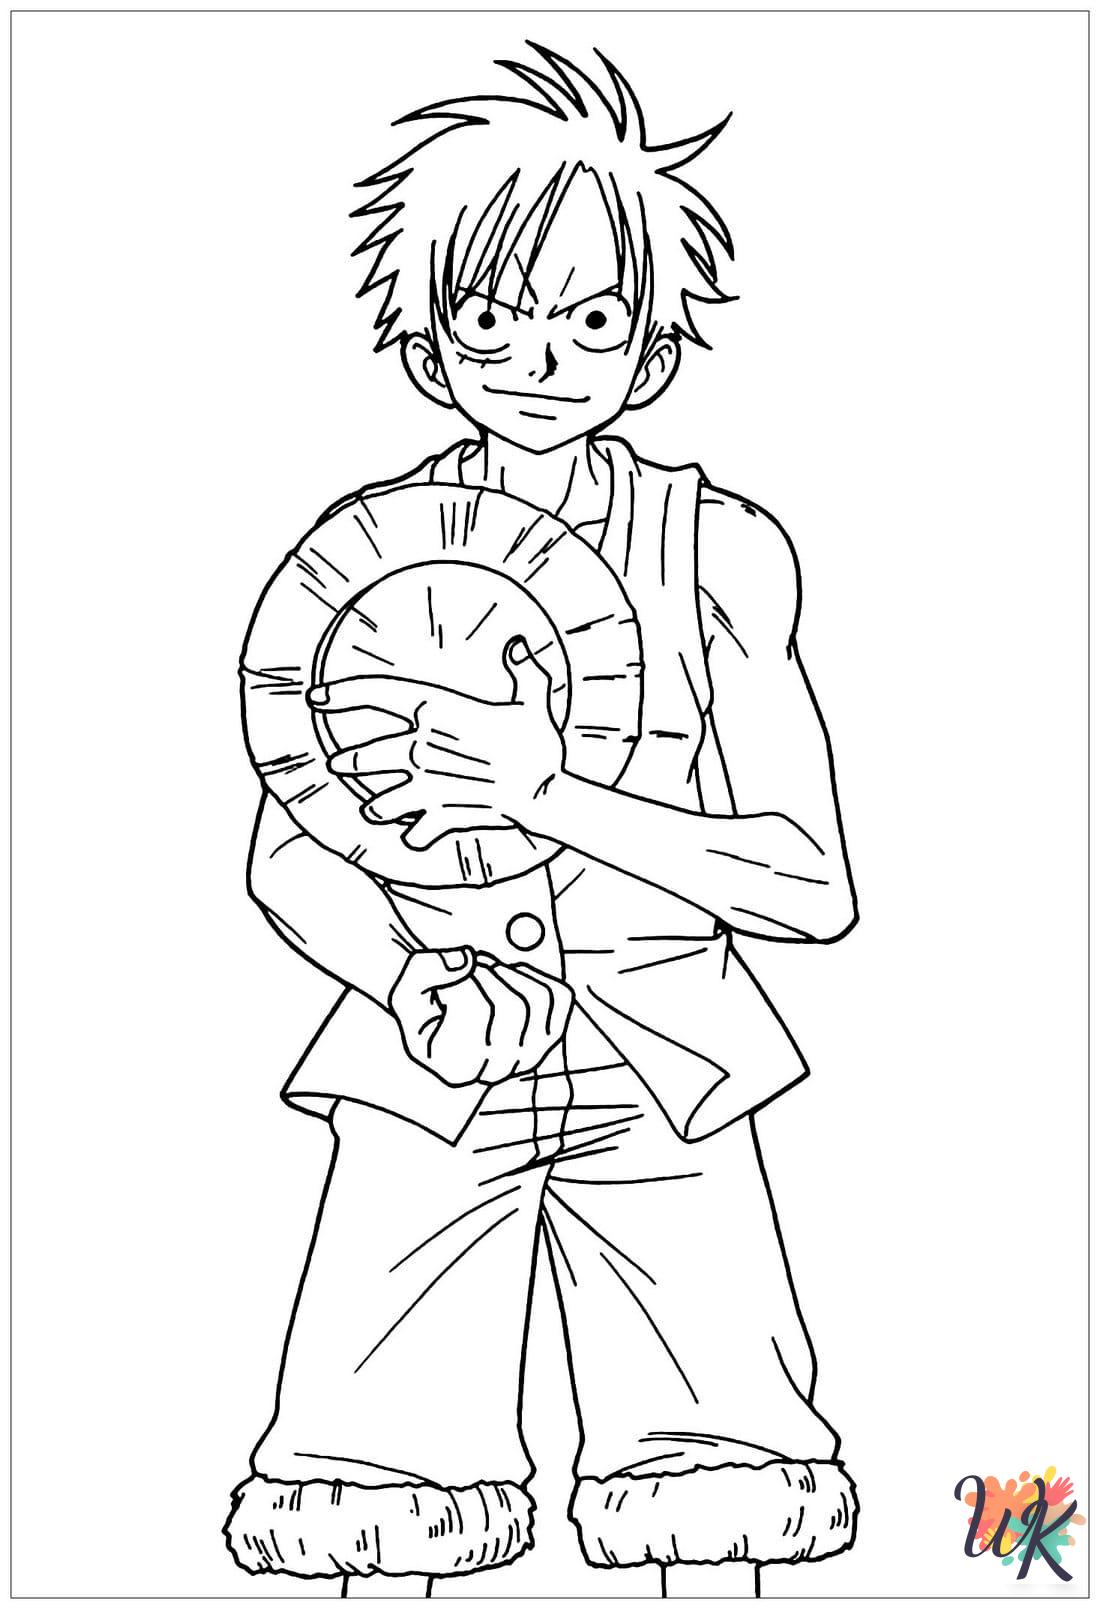 merry One Piece coloring pages